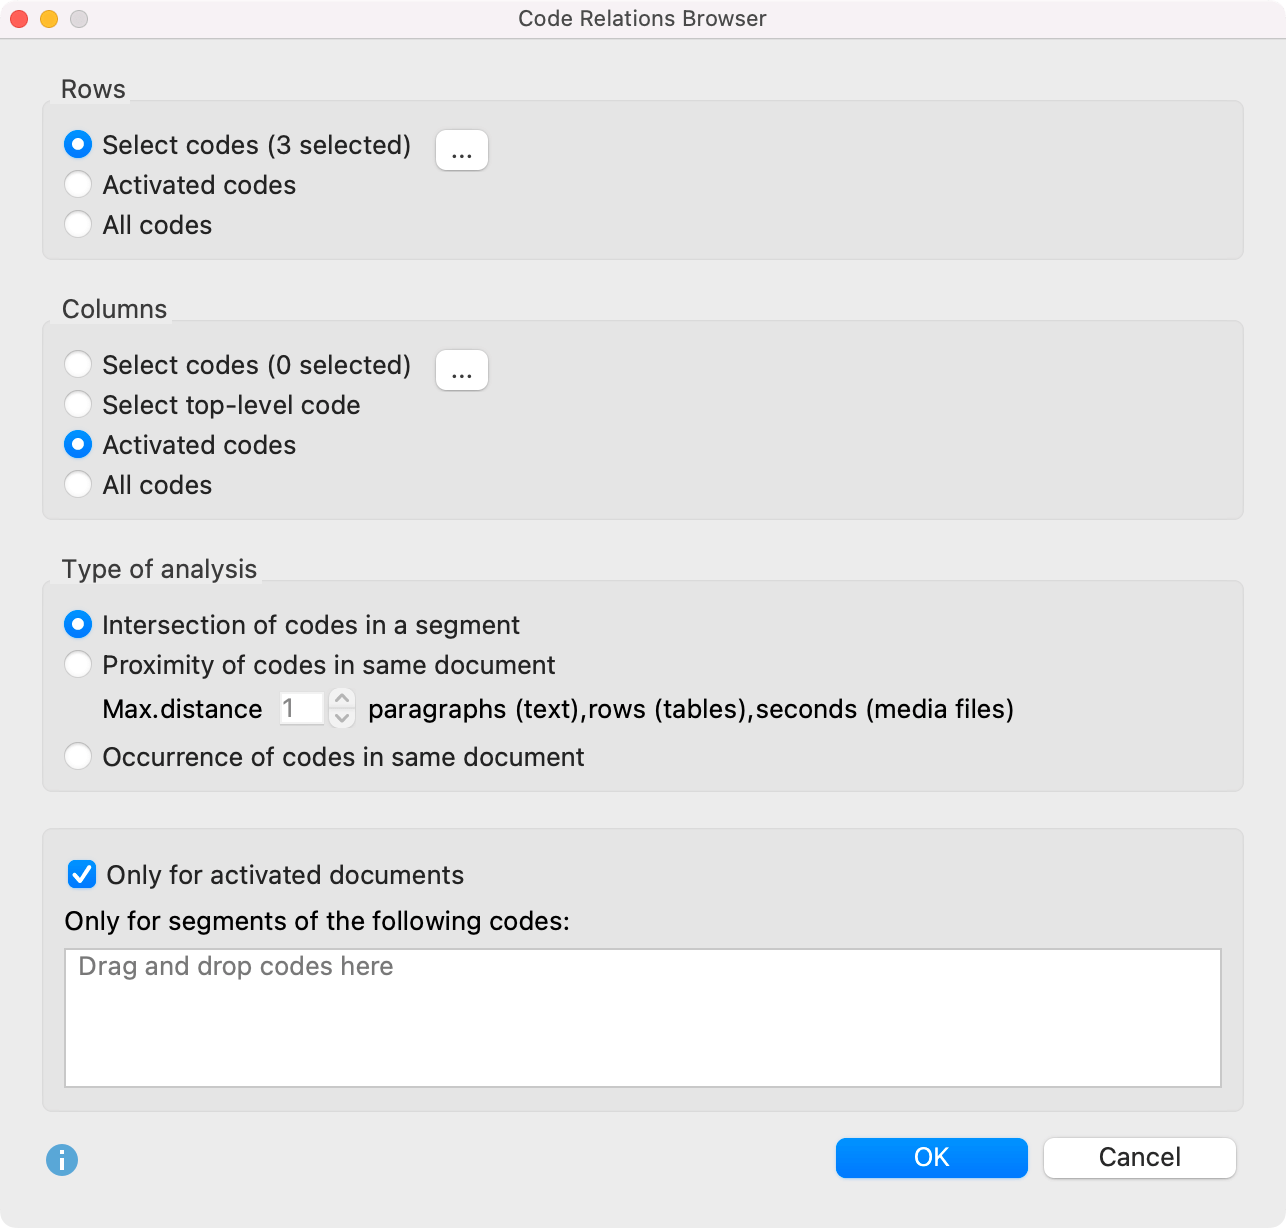 Code Relations Browser options dialog